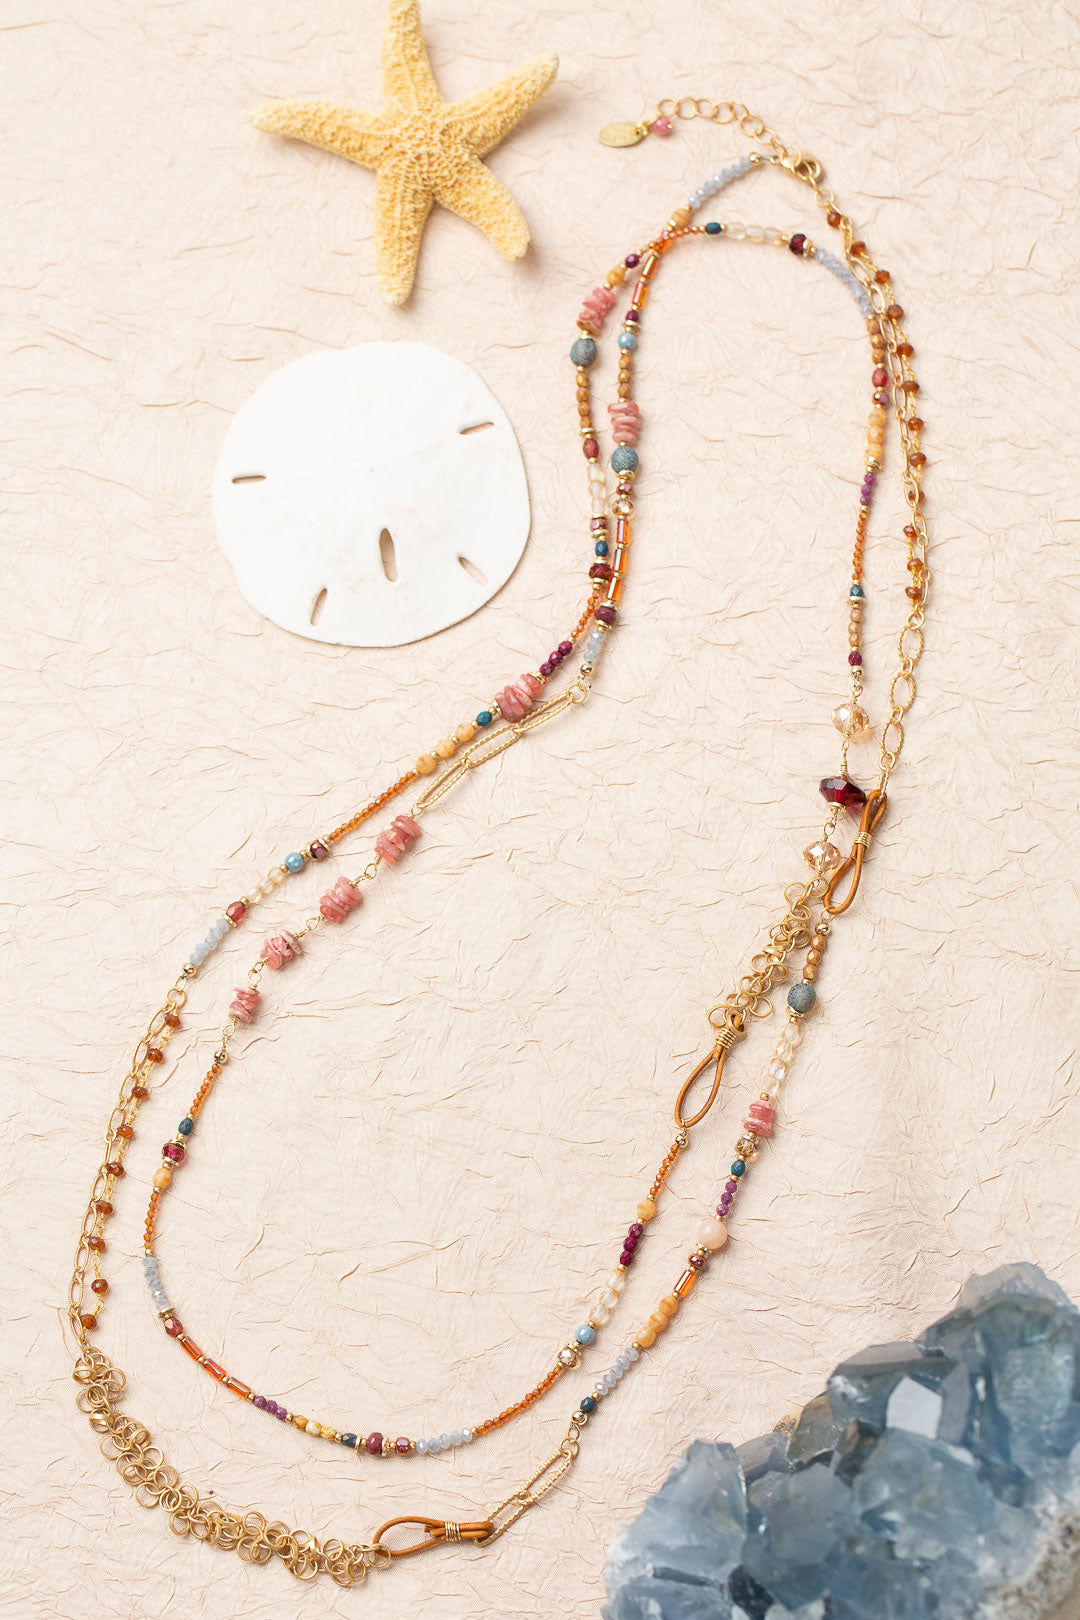 One Of A Kind 57-59" Moonstone, Rhodochrosite, Czech Glass, Ruby Collage Necklace